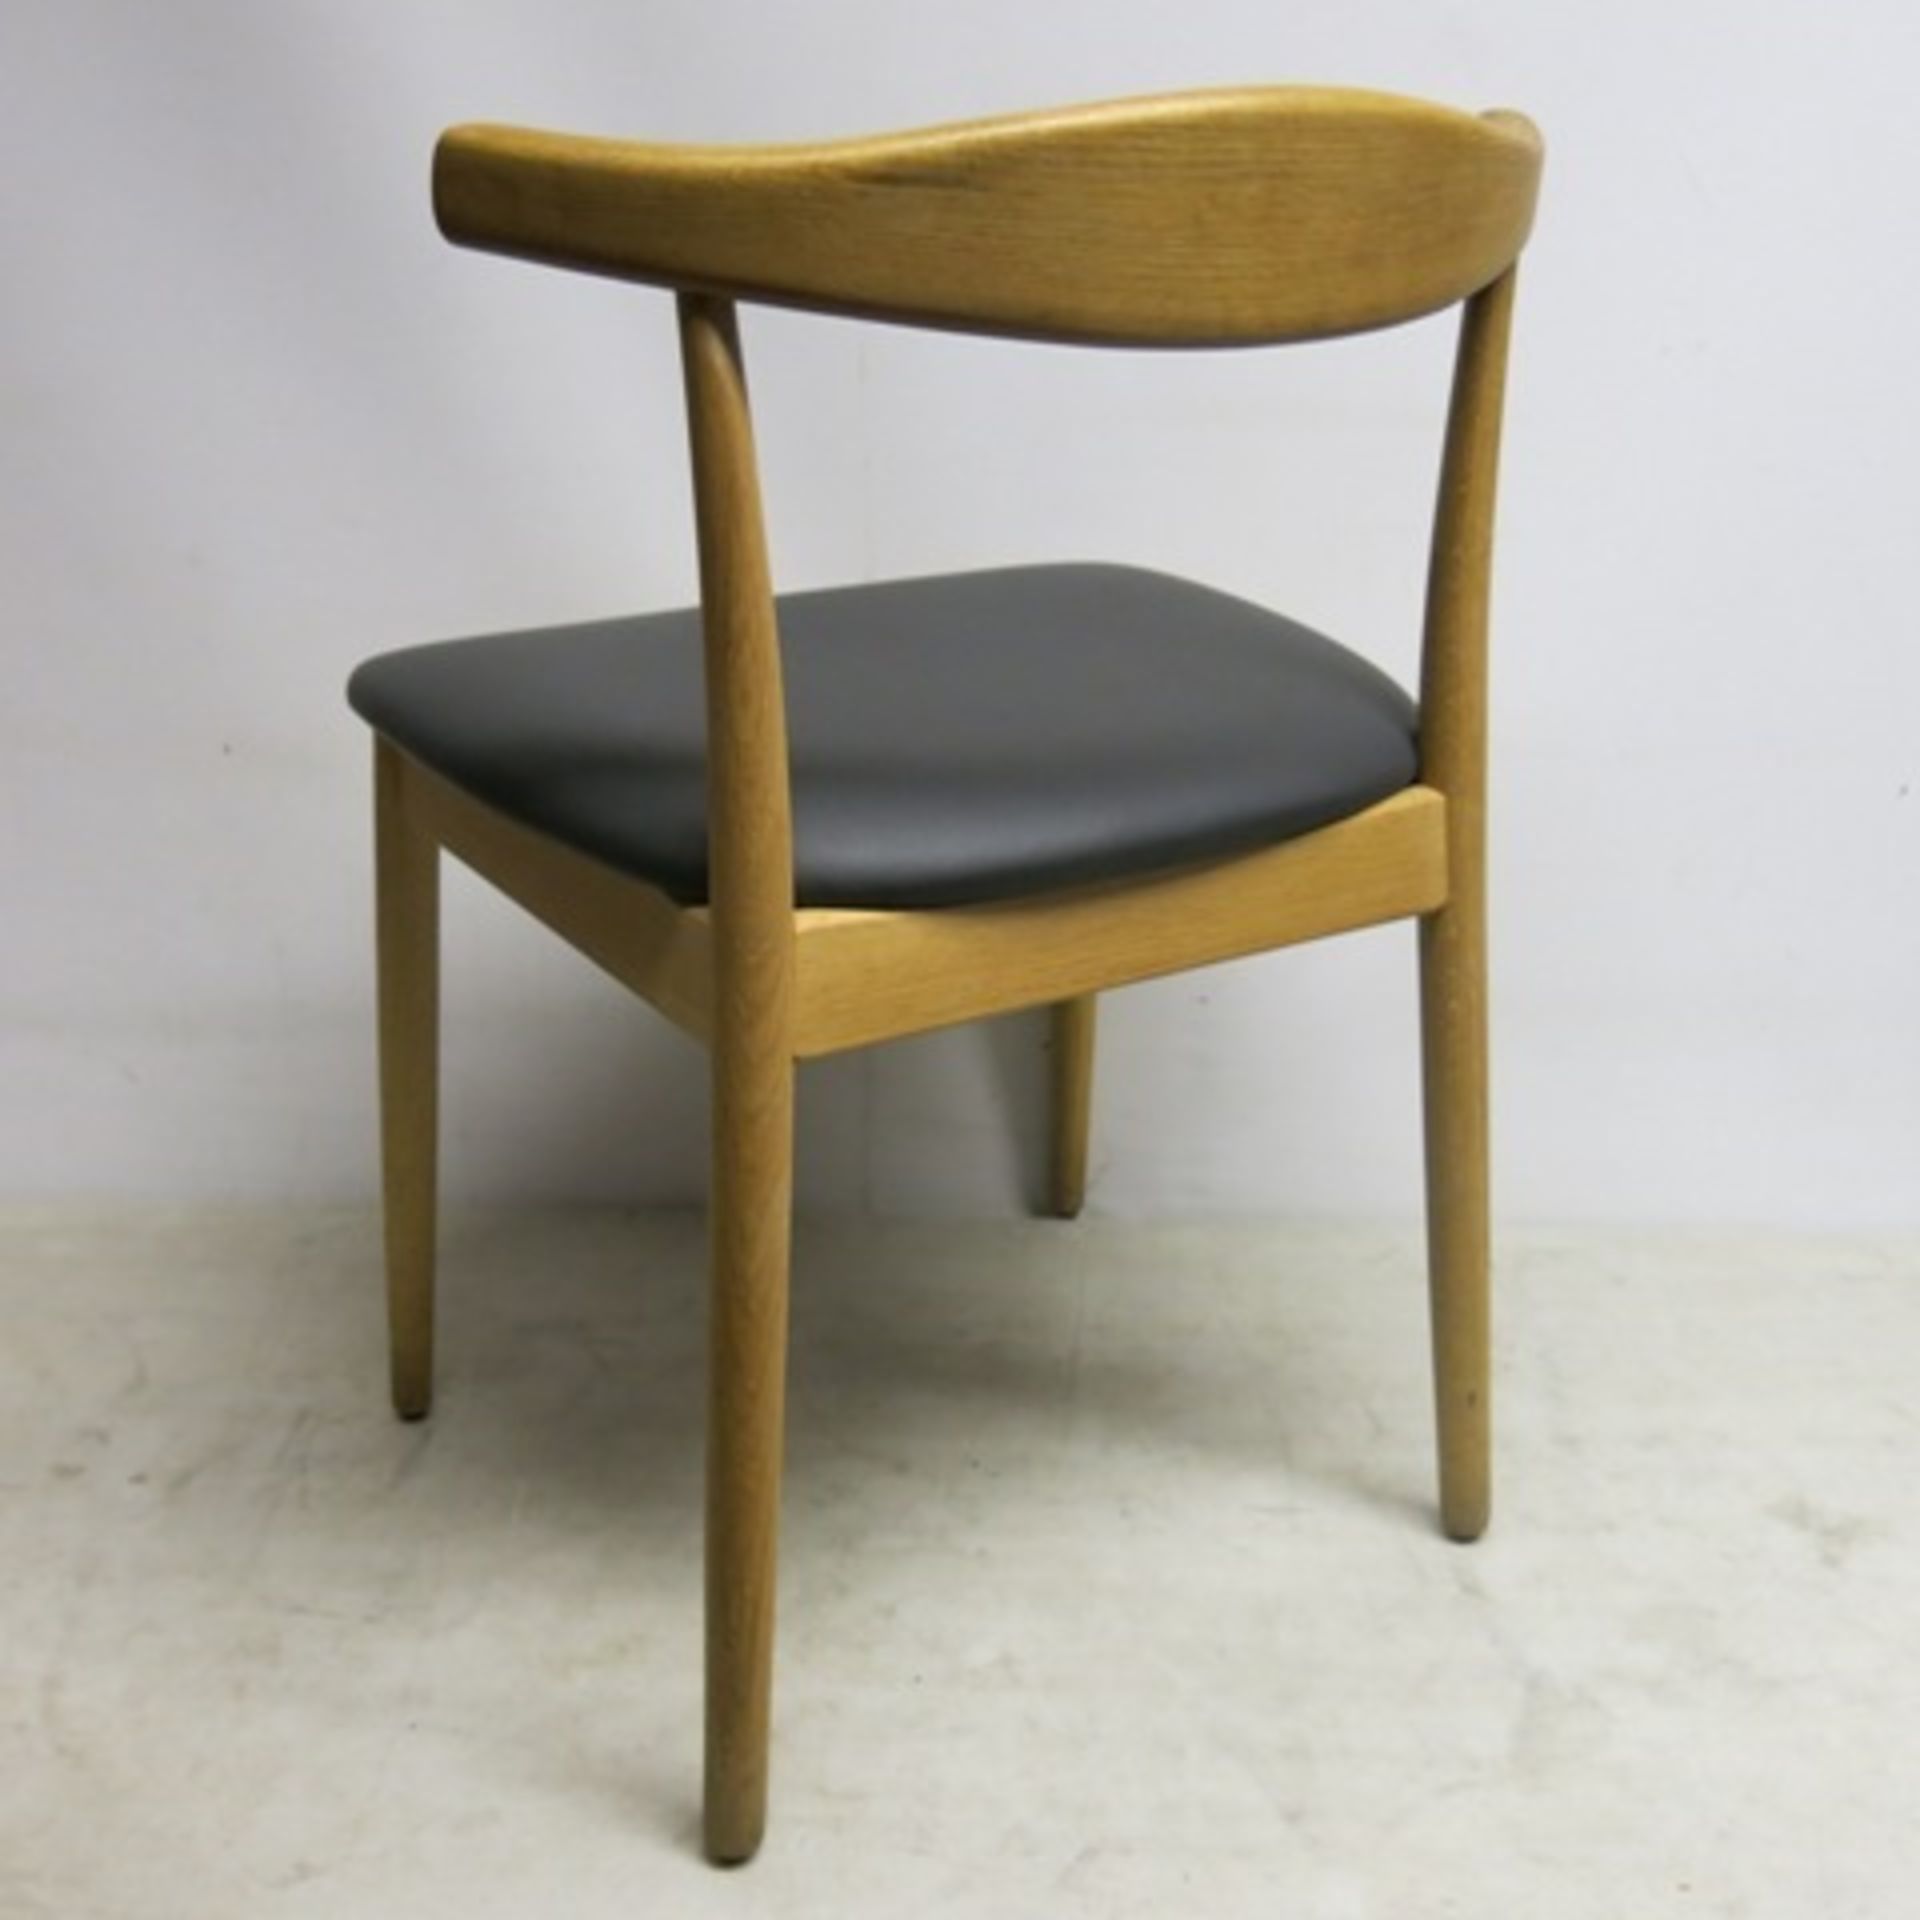 4 x Designer Style, Solid Light Oak Dining Chairs with Grey Faux Leather Padded Seat. - Image 5 of 7